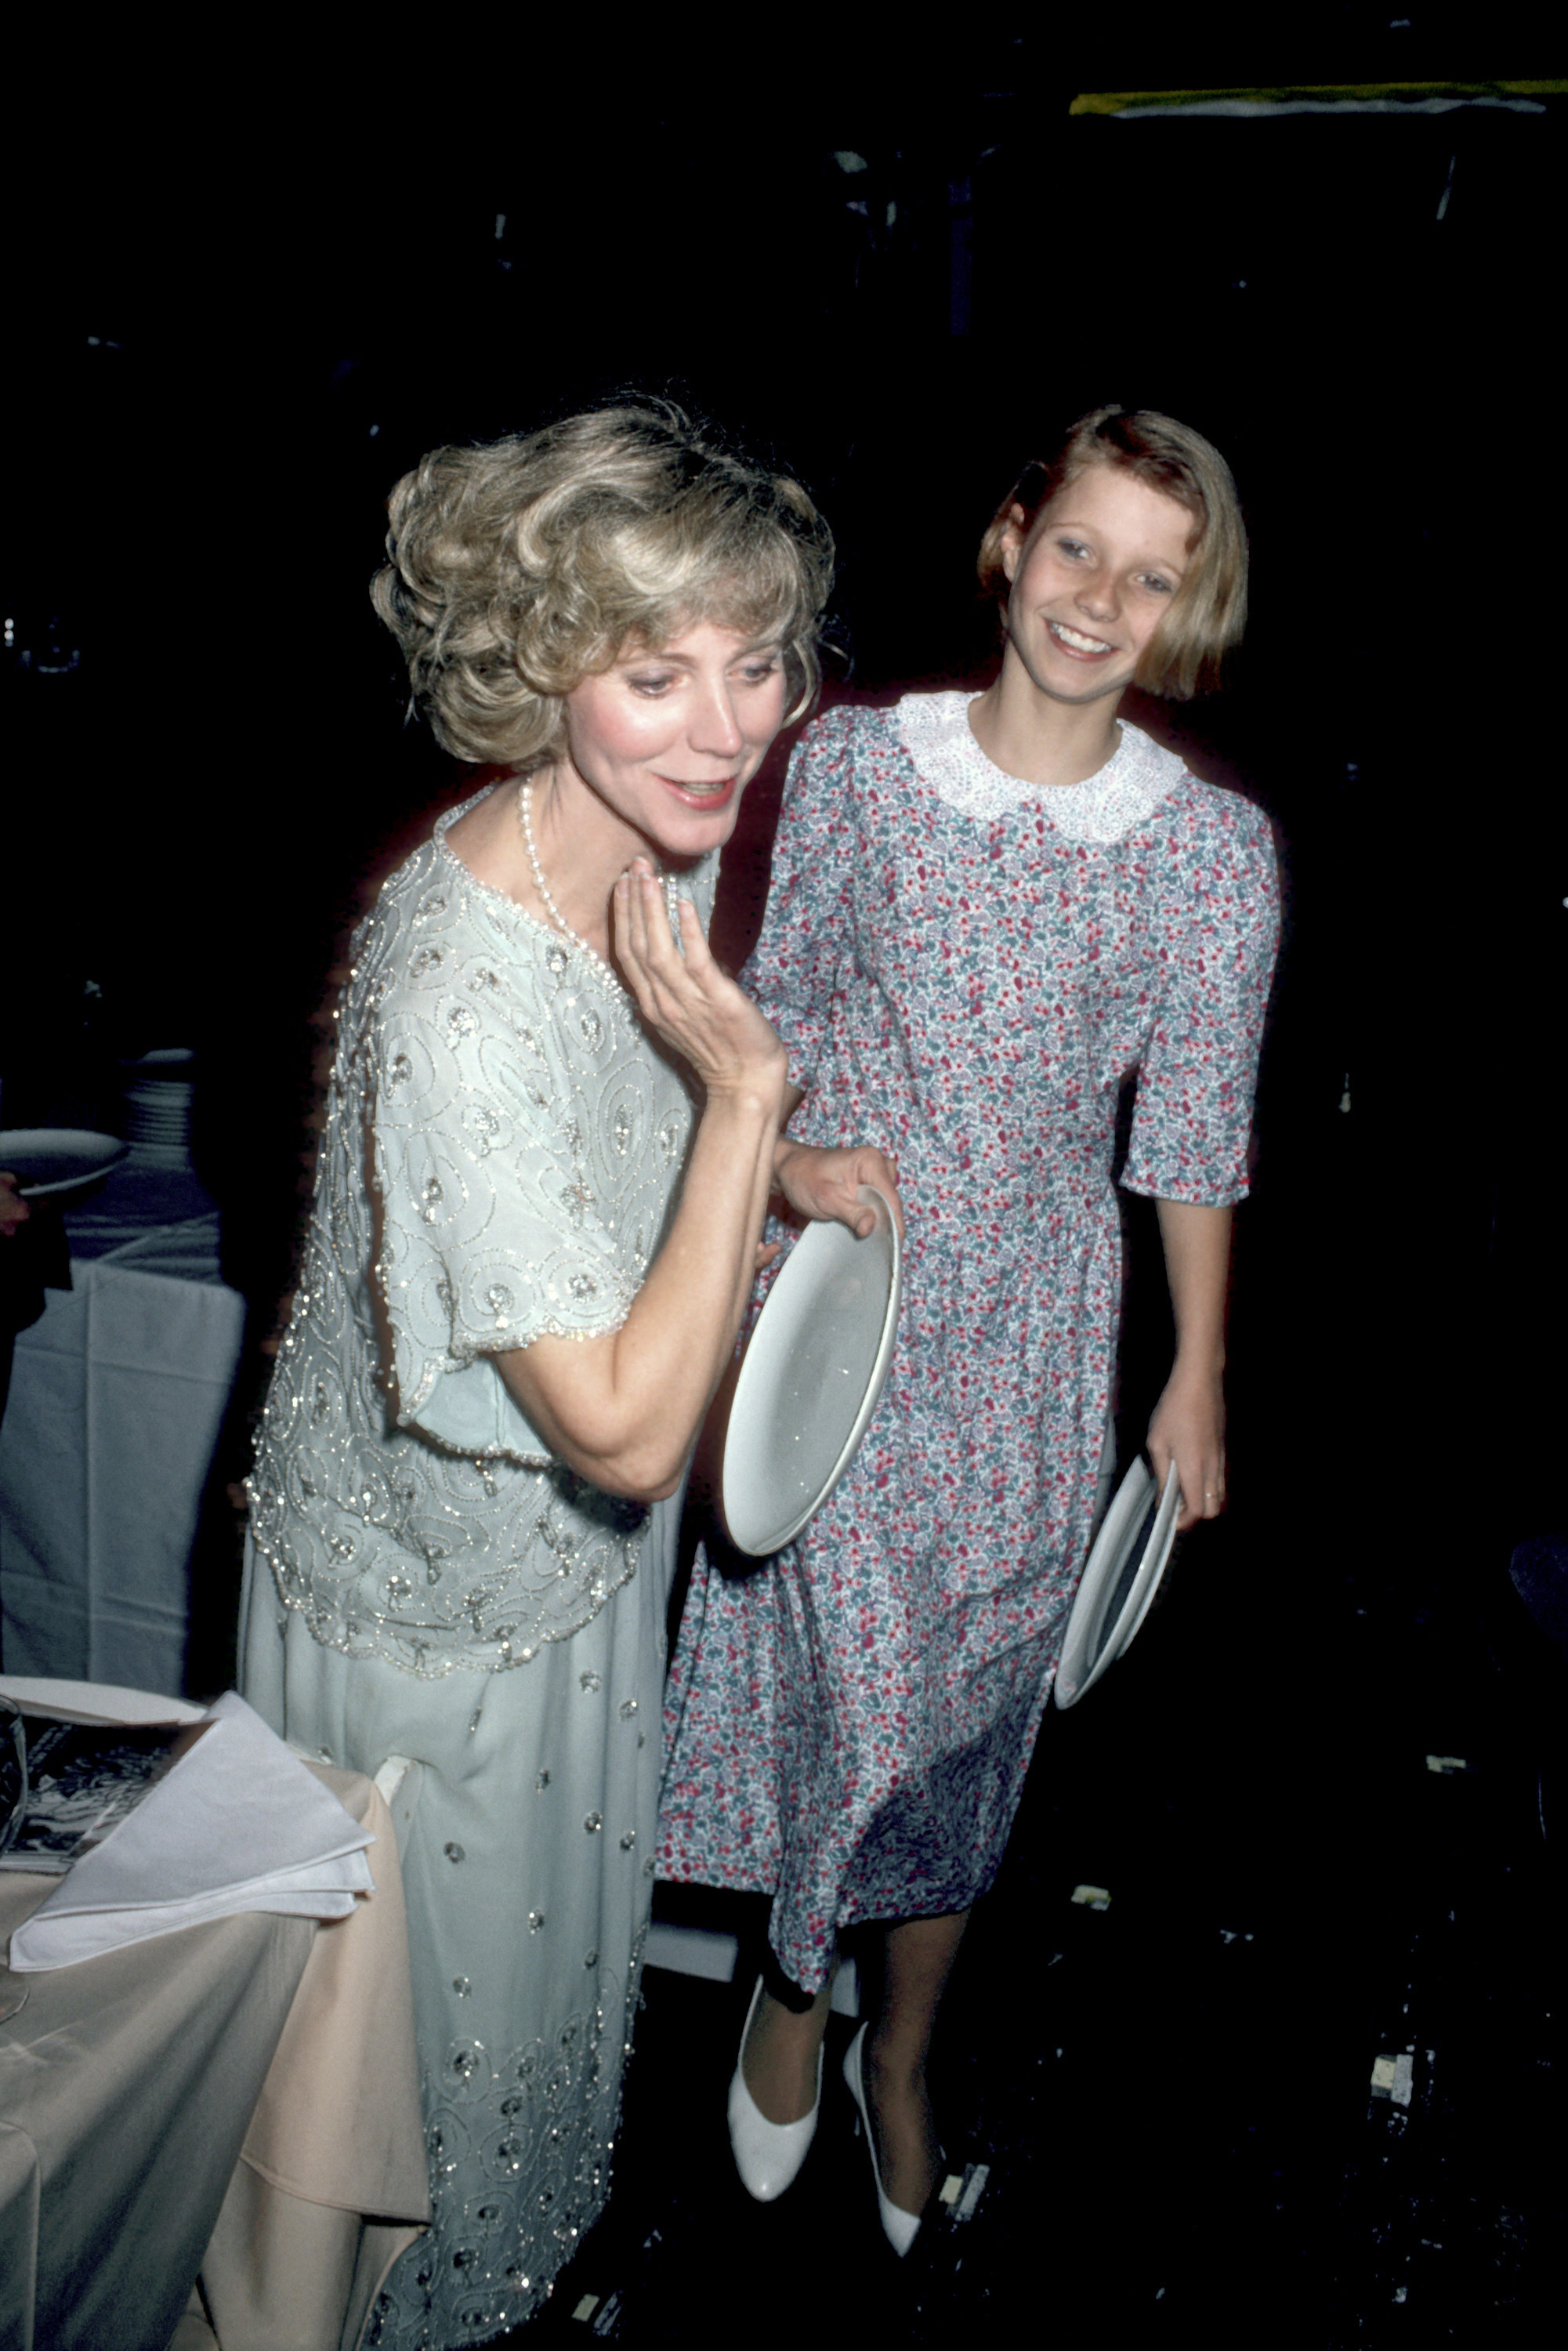 Paltrow and Danner at Studio 54 in New York City